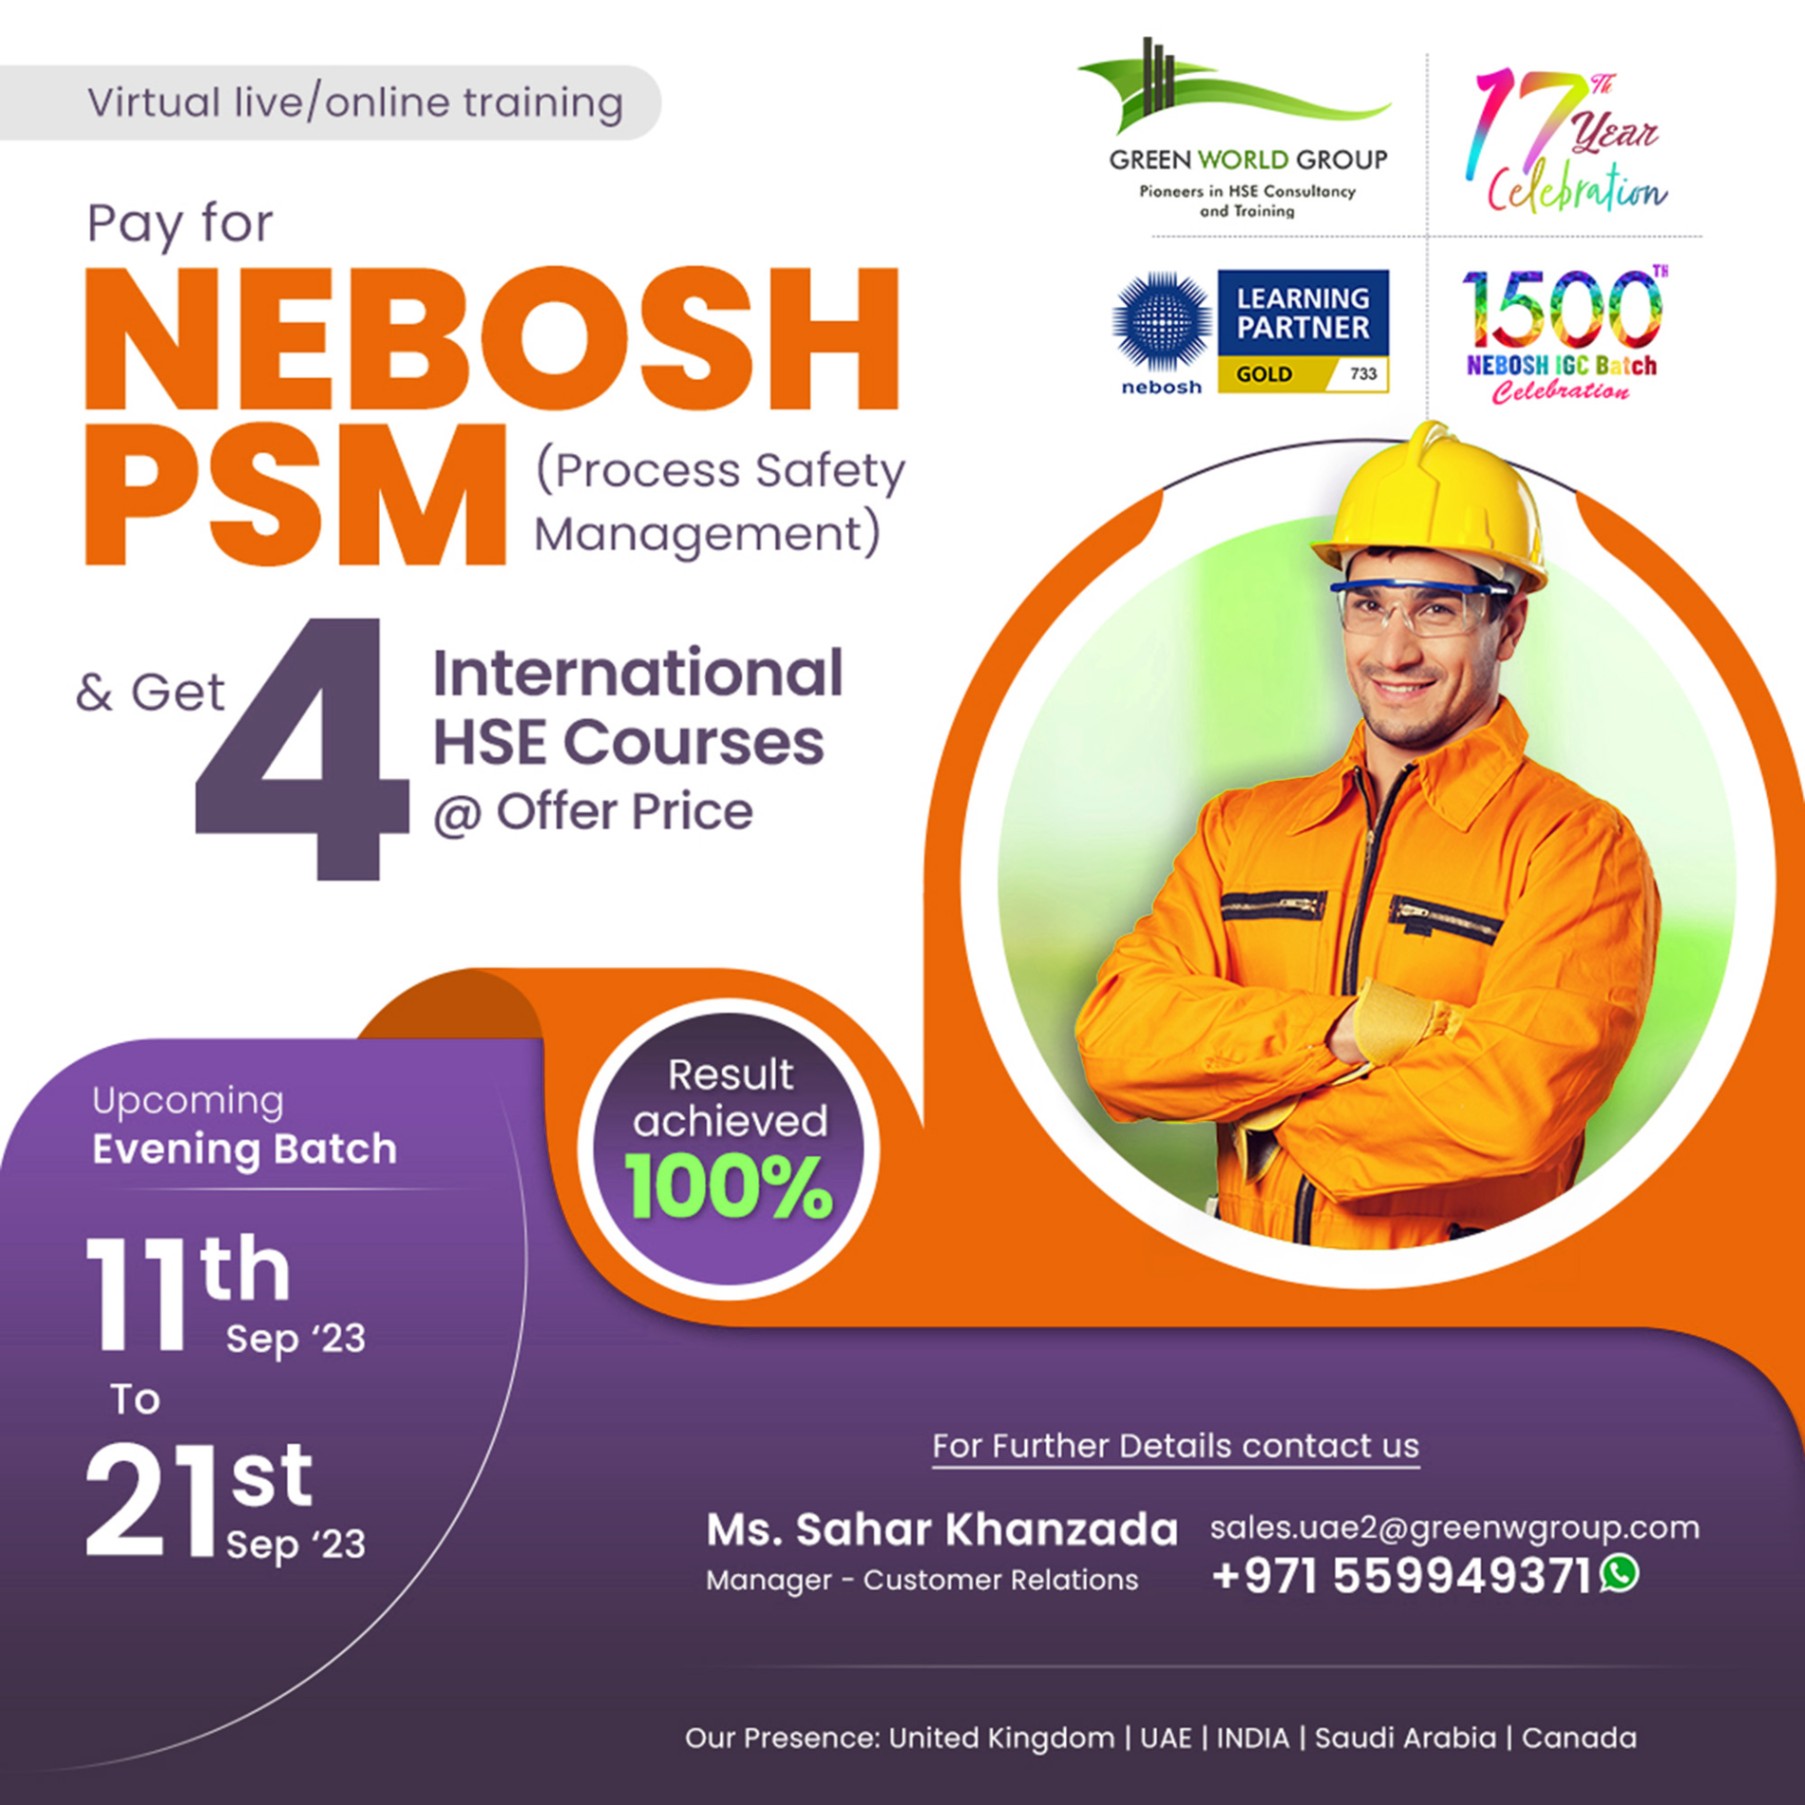 Upgrade your career with our NEBOSH PSM Course In  Pune! 